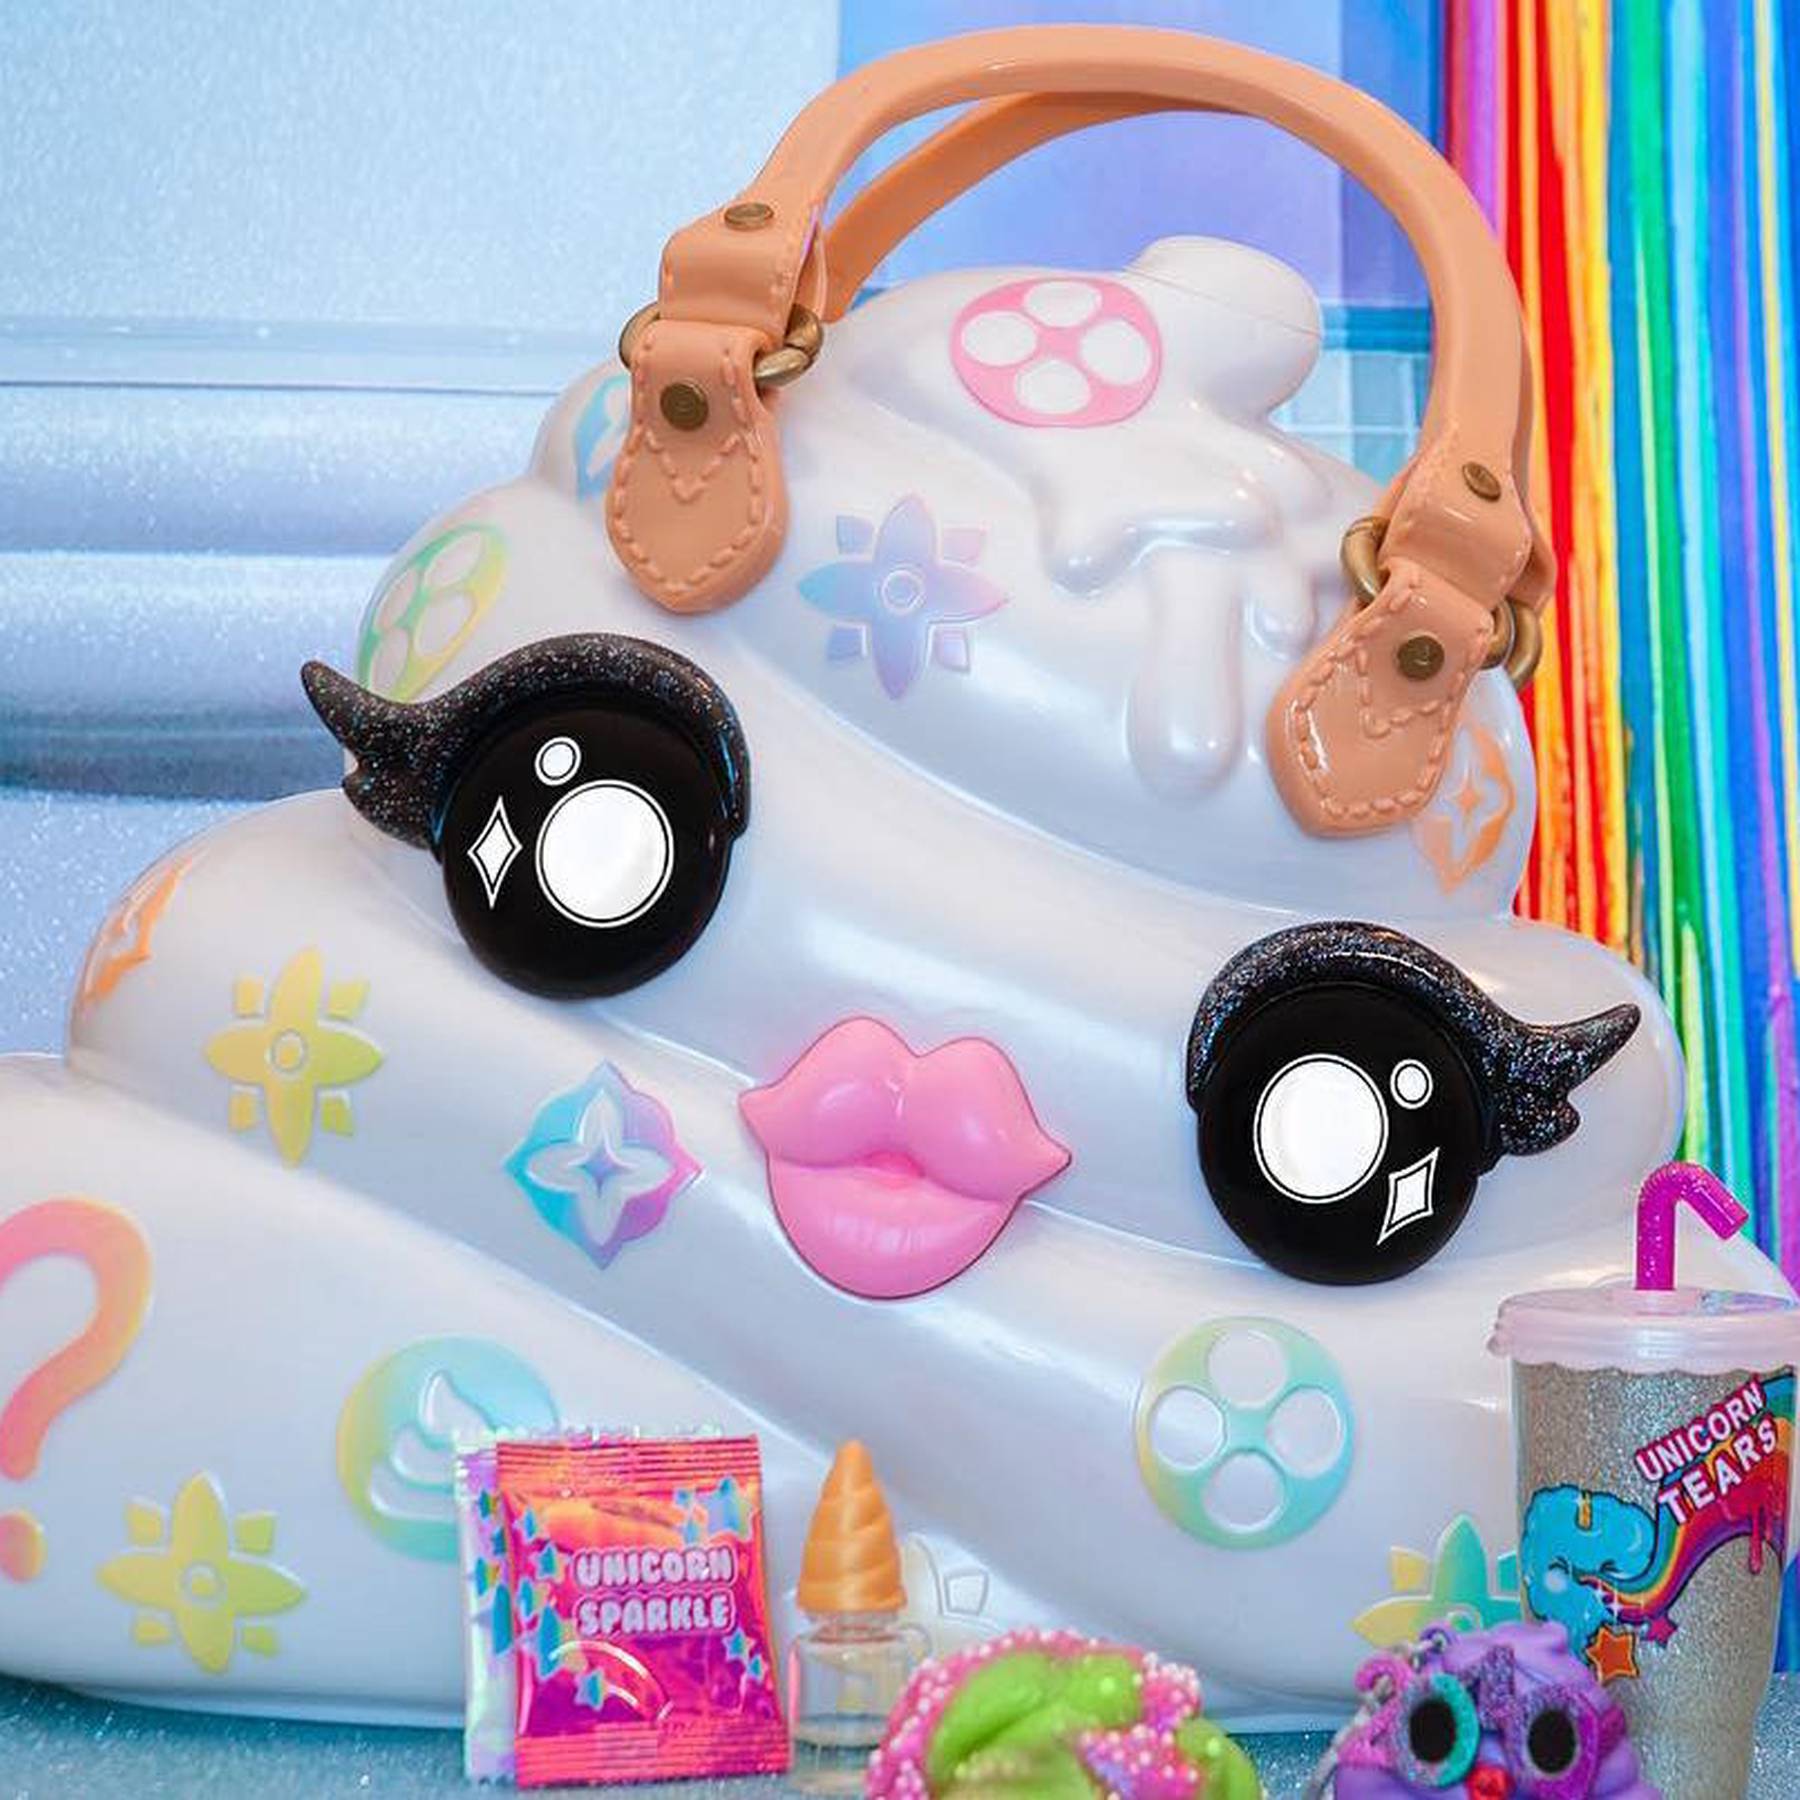 U.S Court Sides With Louis Vuitton Over Poopsie Pooey Puitton Case —  Fashion, Law & Business